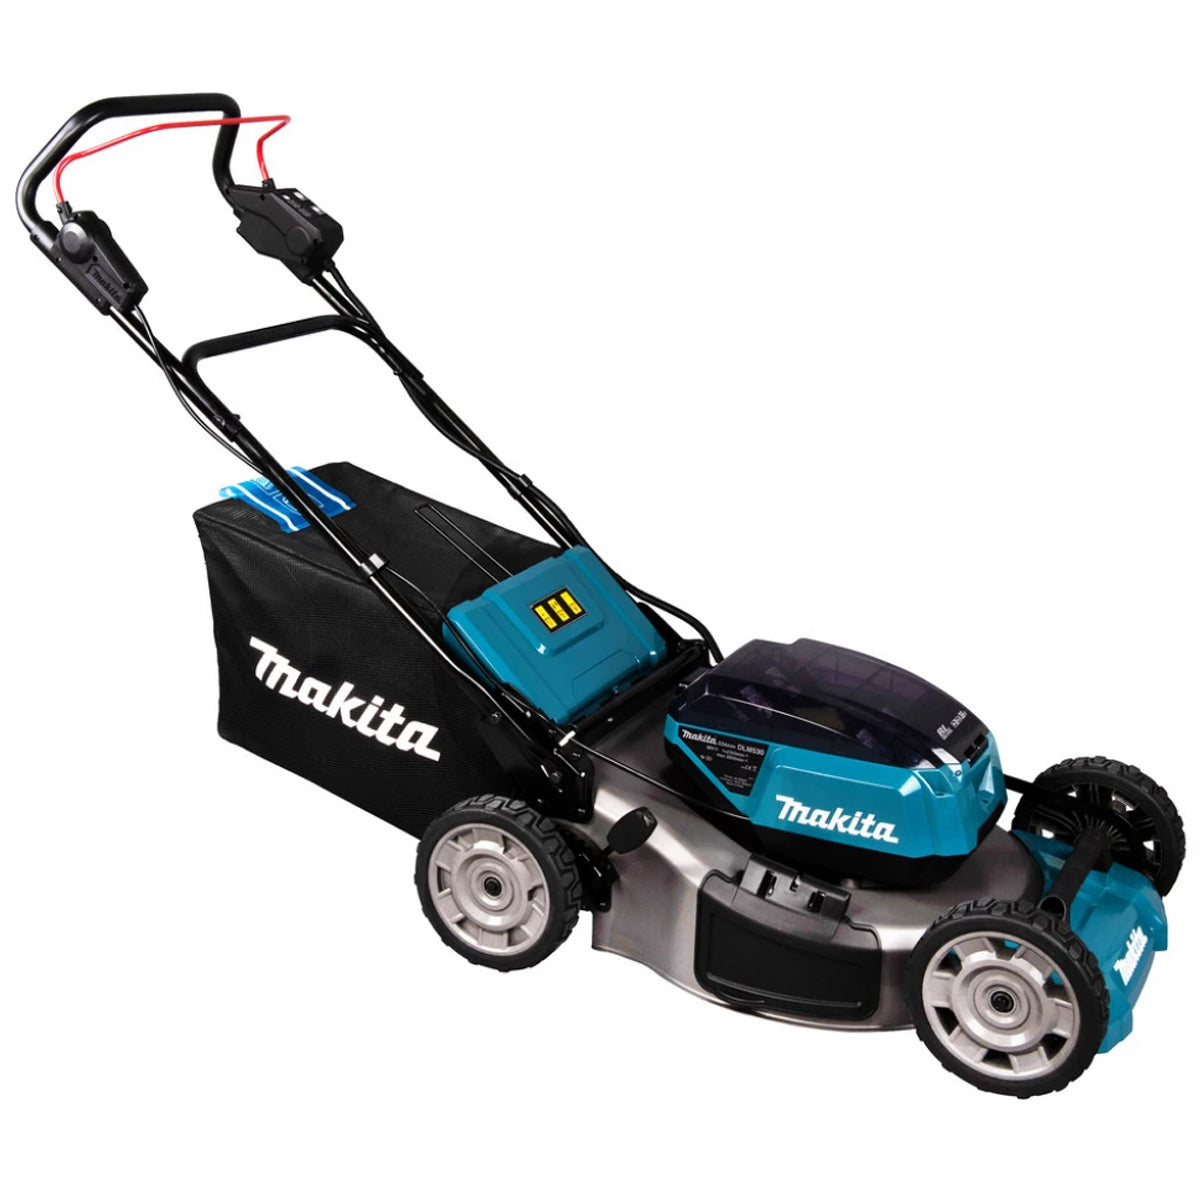 Makita DLM530PG2 36V Brushless Lawn Mower 534mm with 2 x 6.0Ah Batteries & Charger